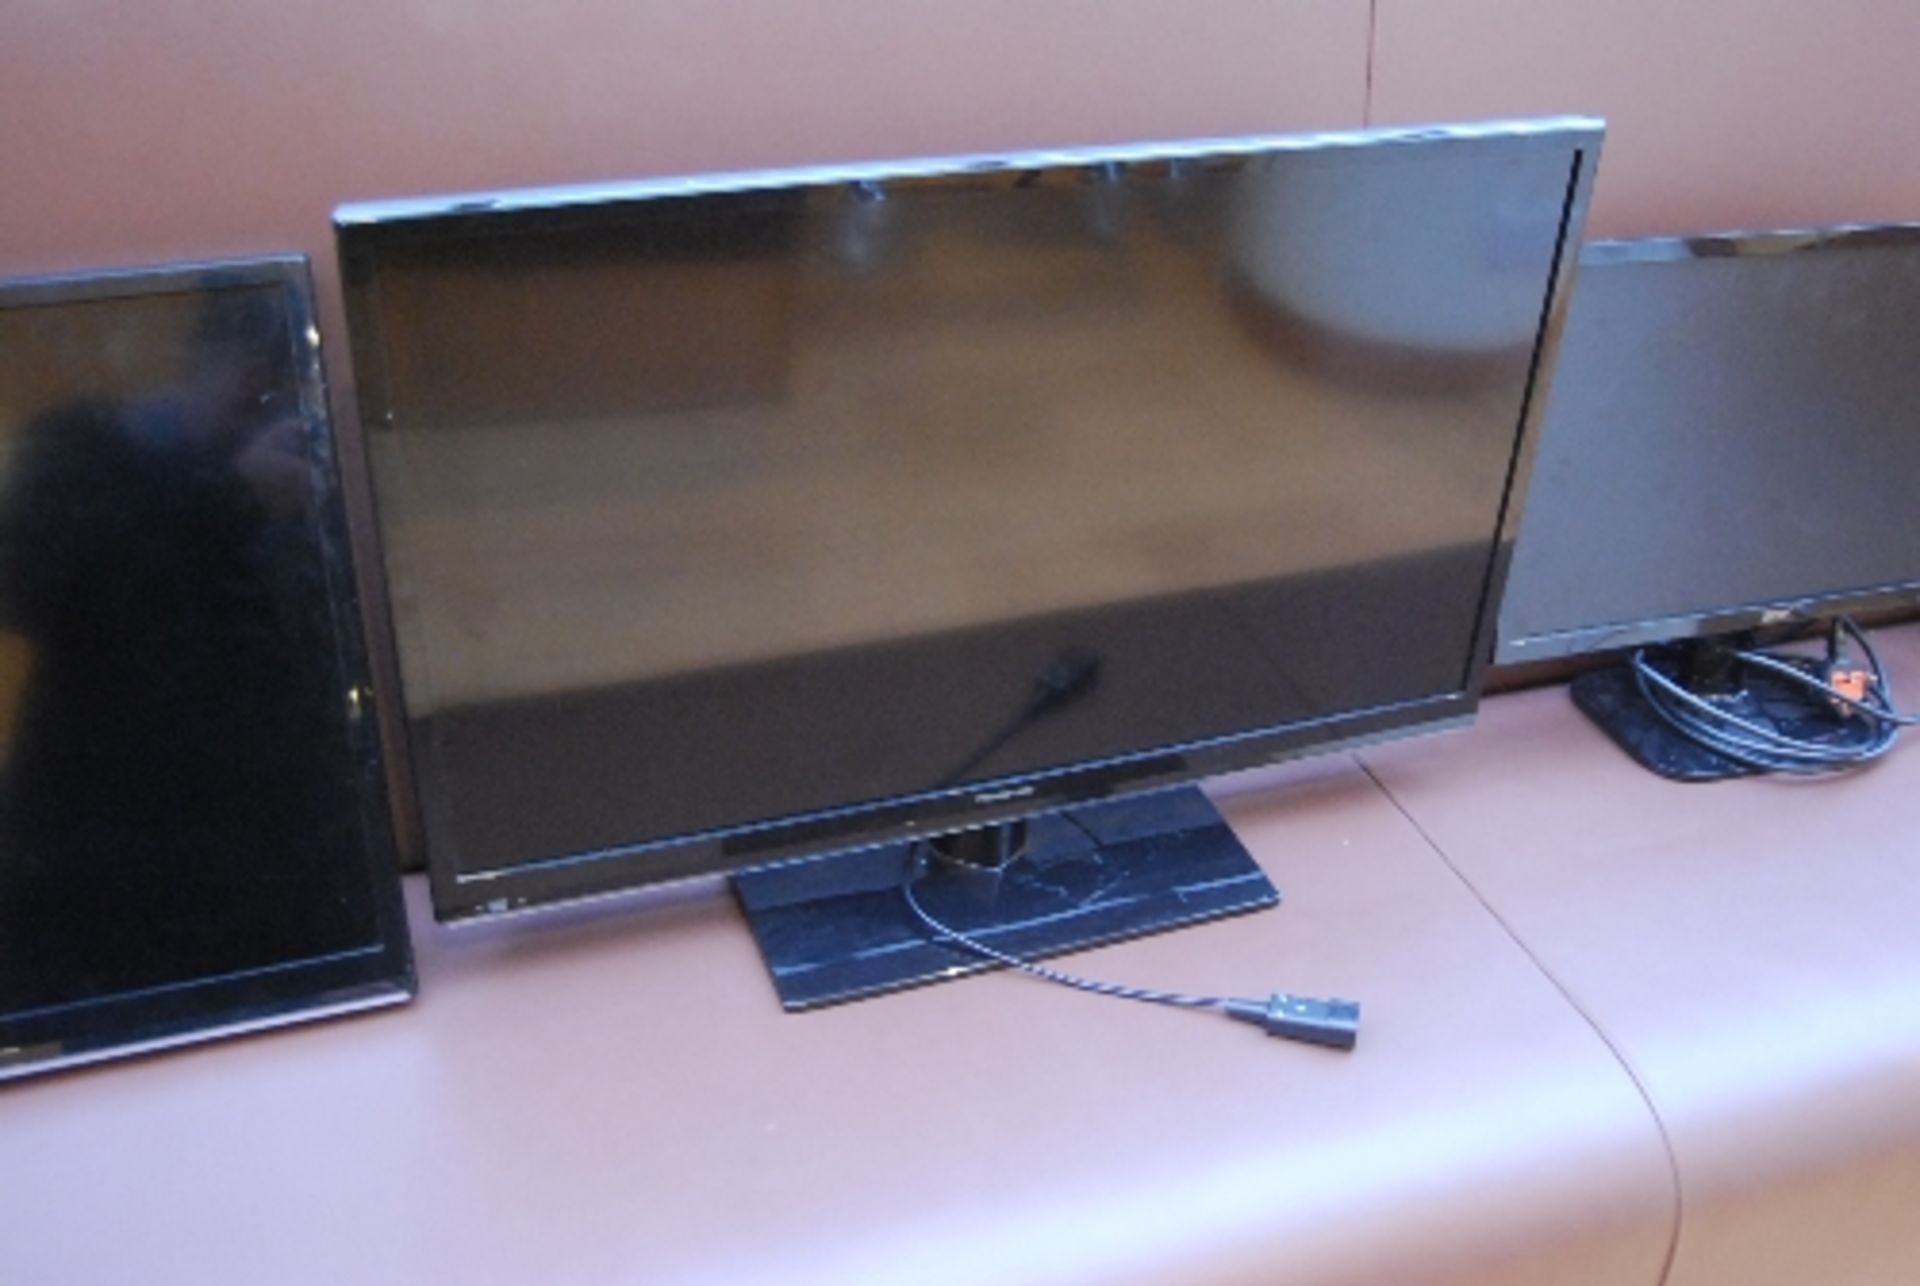 Panasonic TX-L32EM6B LCD television (no remote) with stand